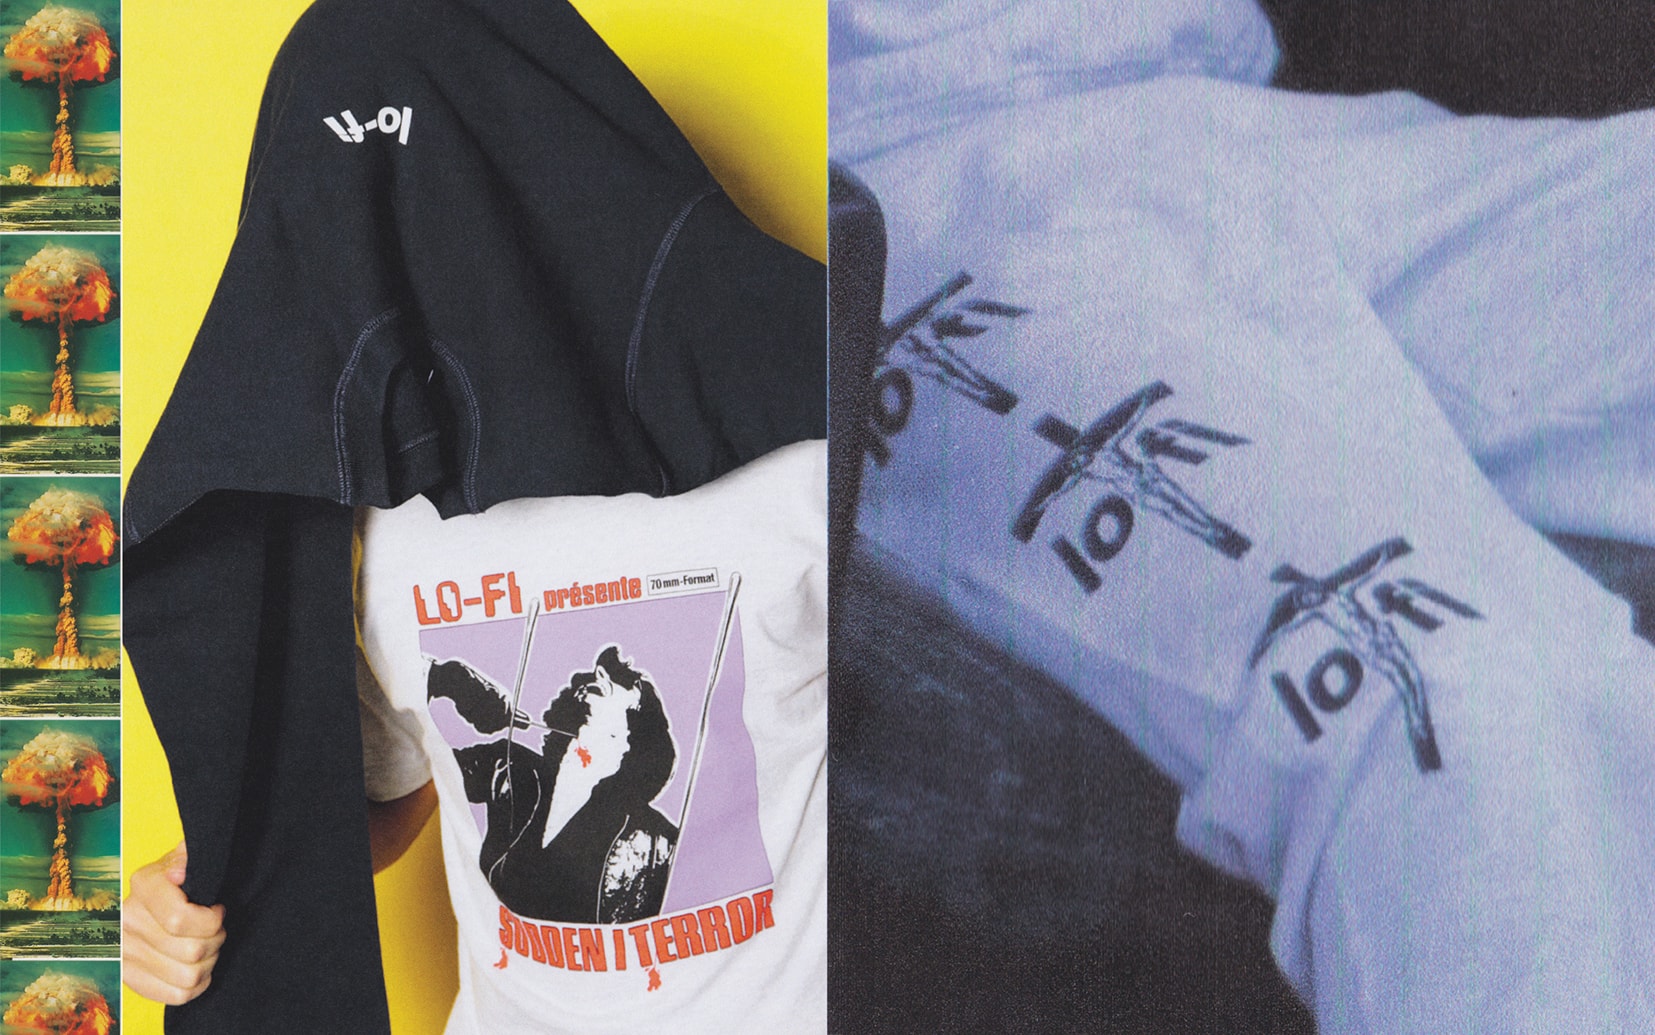 Lo-Fi Range #004 'Sudden Terror' Lookbook Collection Hoodies Jackets Graphic Tees T-Shirts Tracksuits Accessories Keychains Tote Bags Sweatshirts In Store Online Saturday Sunday June 2 3